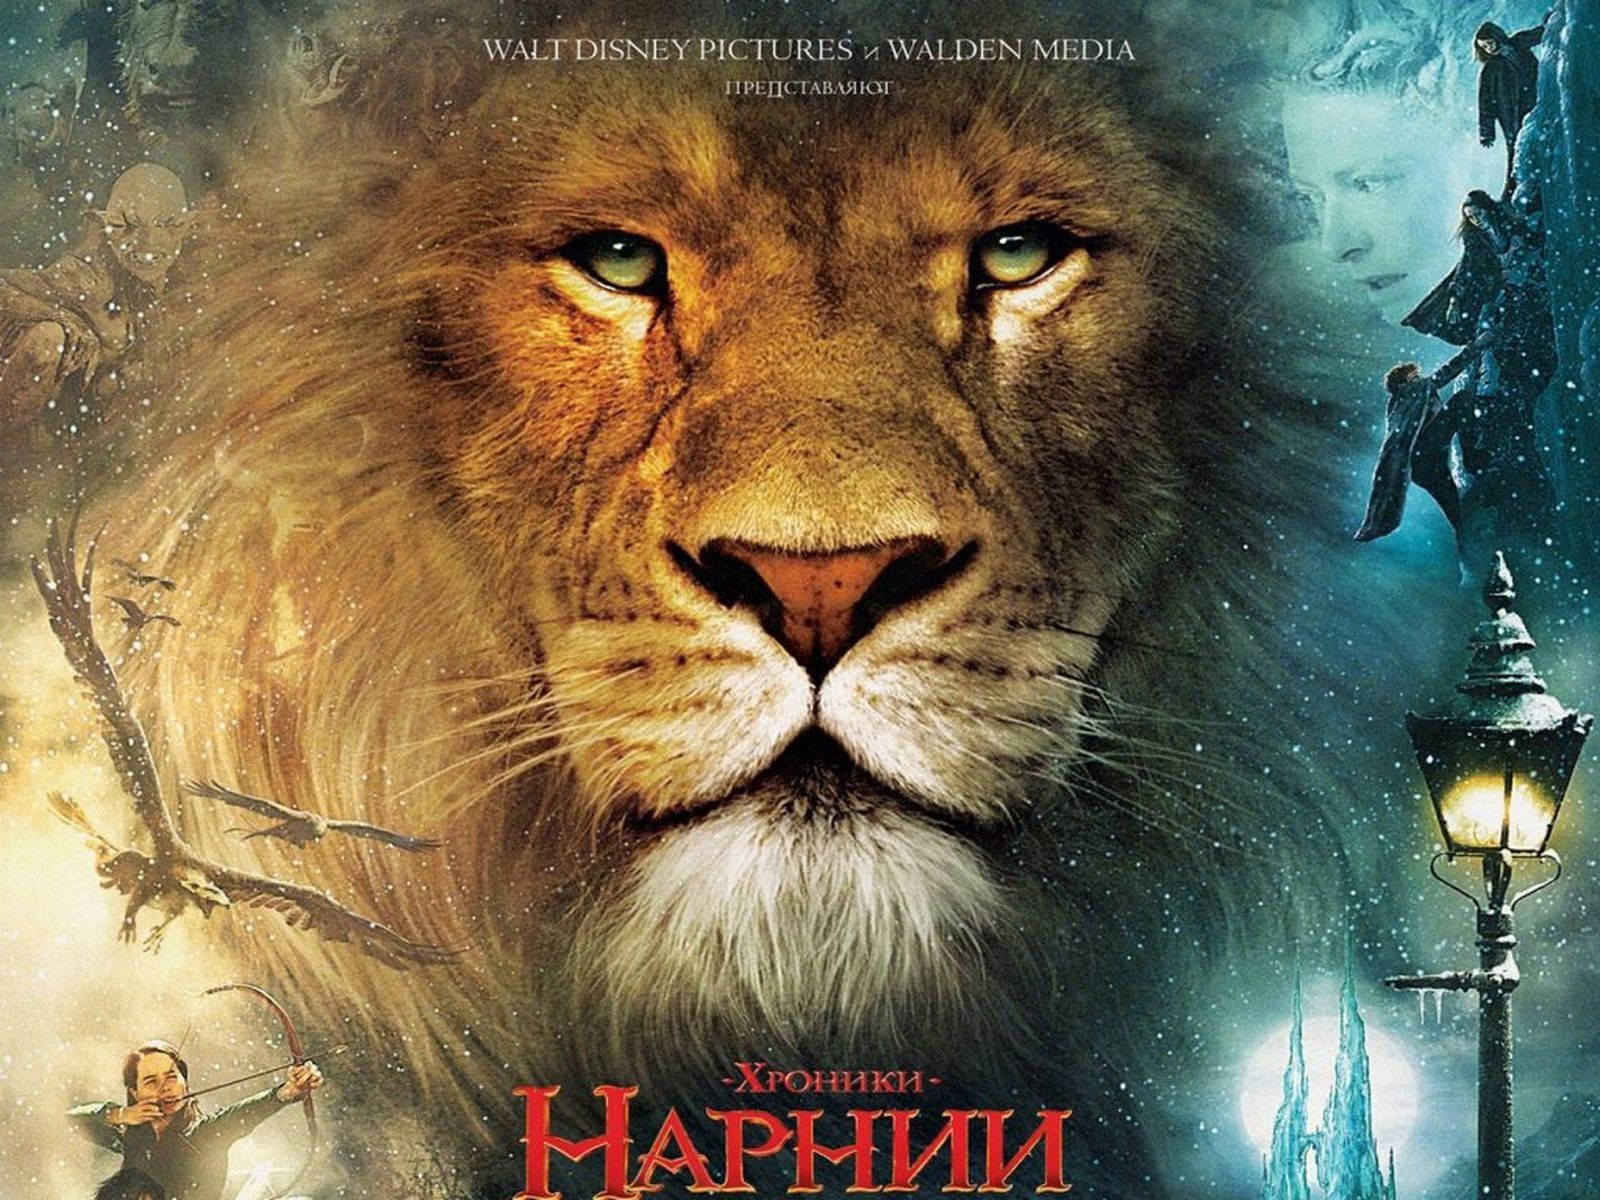 The Chronicles of Narnia: The Lion, the Witch and the Wardrobe wallpaper and image, picture, photo